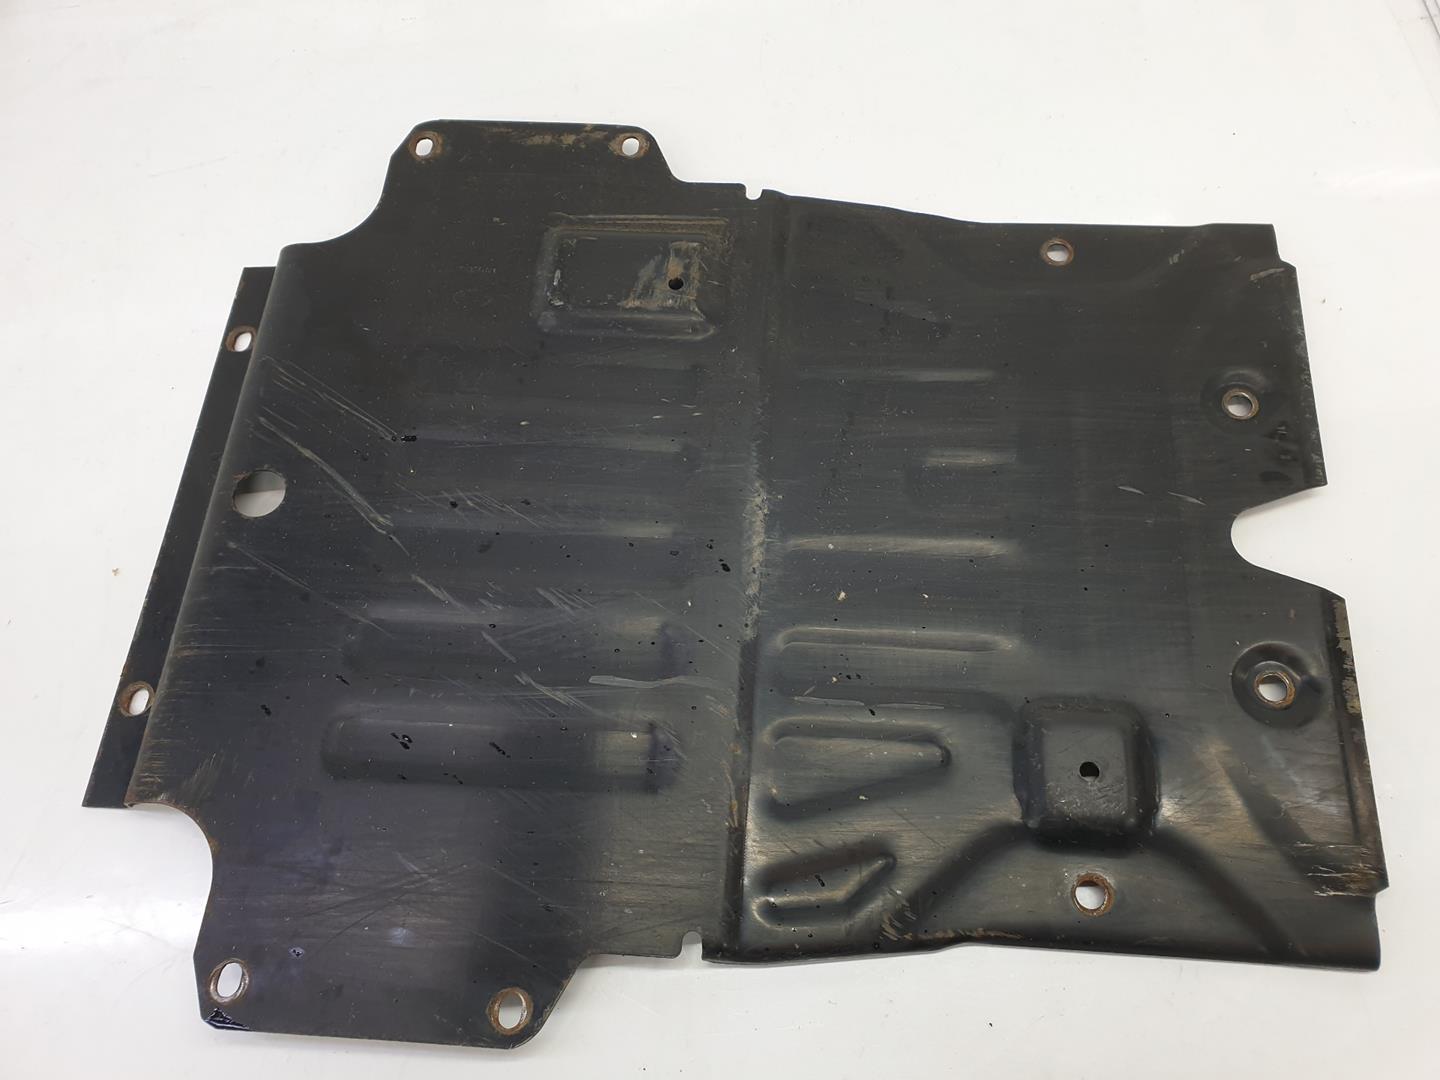 LAND ROVER Discovery 4 generation (2009-2016) Front Engine Cover LR069243, GH226B629AB 24131486